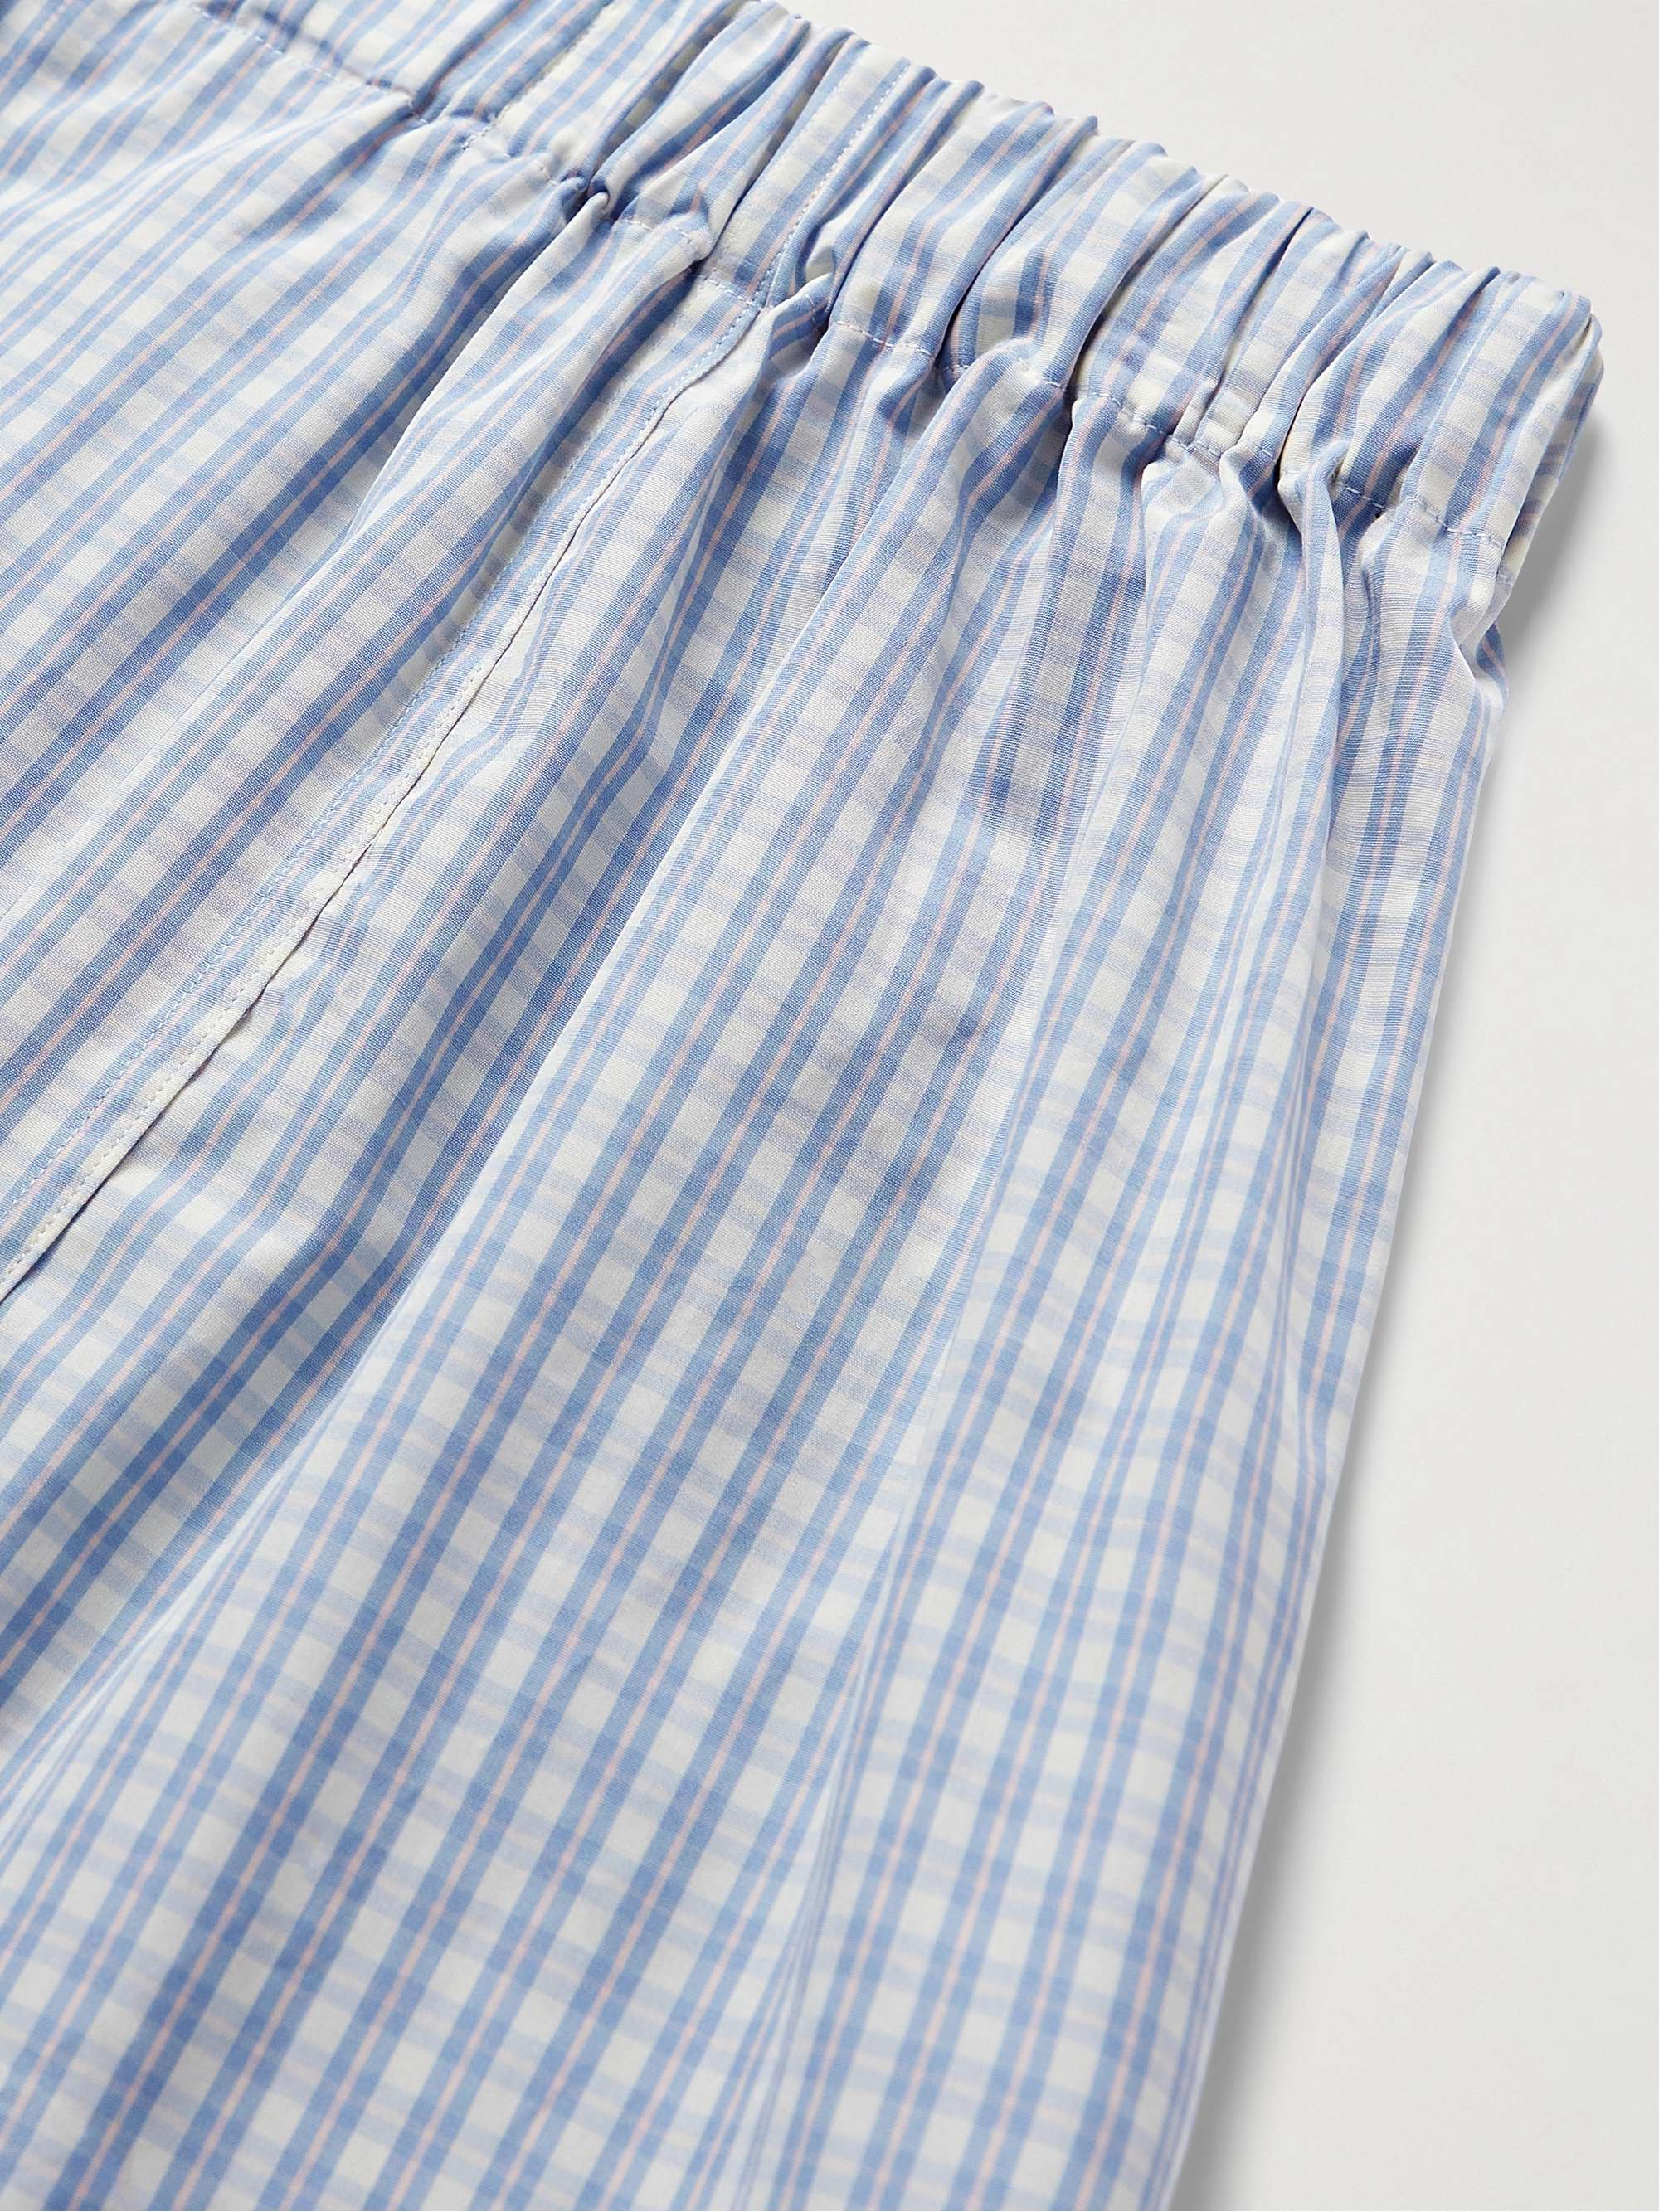 TURNBULL & ASSER Checked Cotton Boxer Shorts